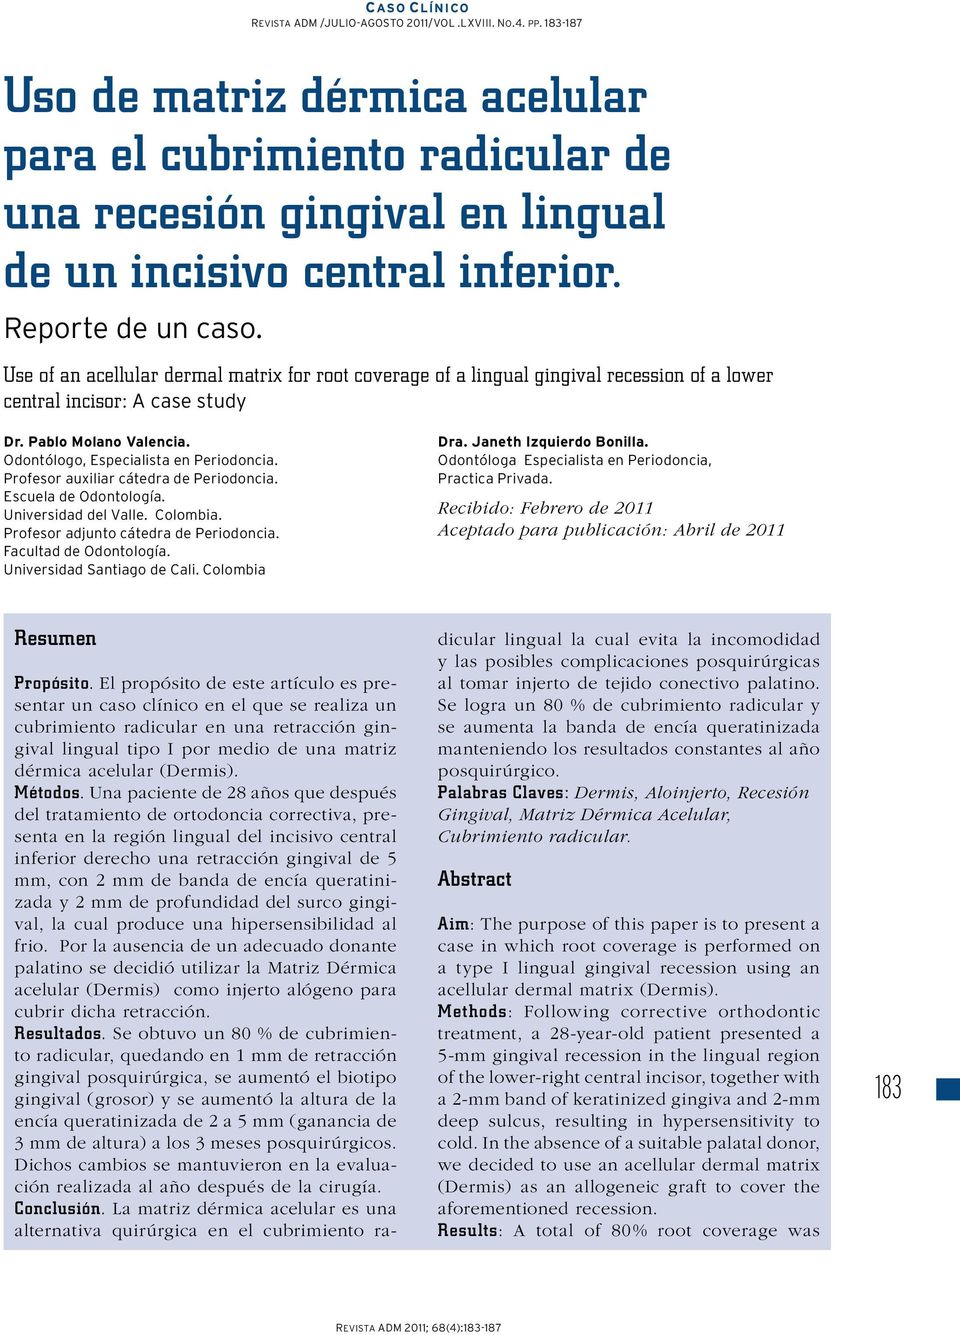 Use of an acellular dermal matrix for root coverage of a lingual gingival recession of a lower central incisor: A case study Dr. Pablo Molano Valencia. Odontólogo, Especialista en Periodoncia.